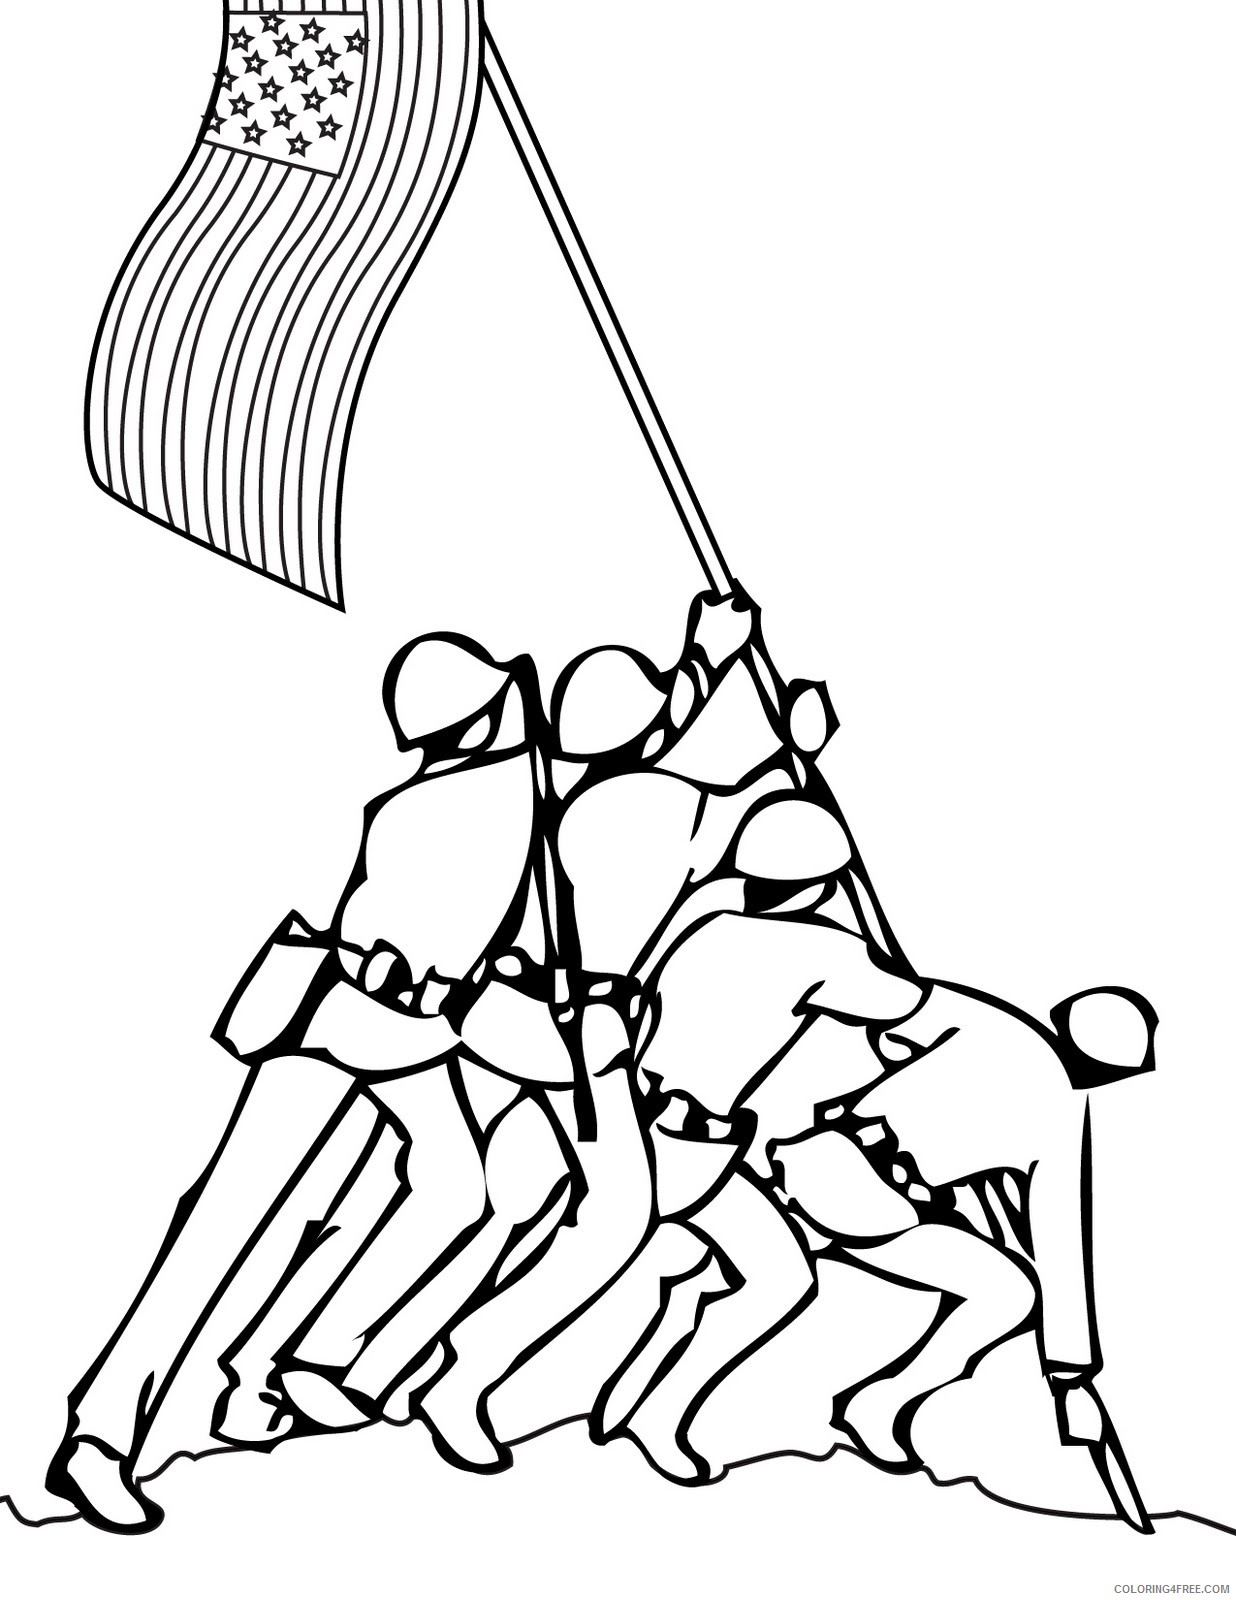 veterans day coloring pages iwo jima memorial Coloring4free